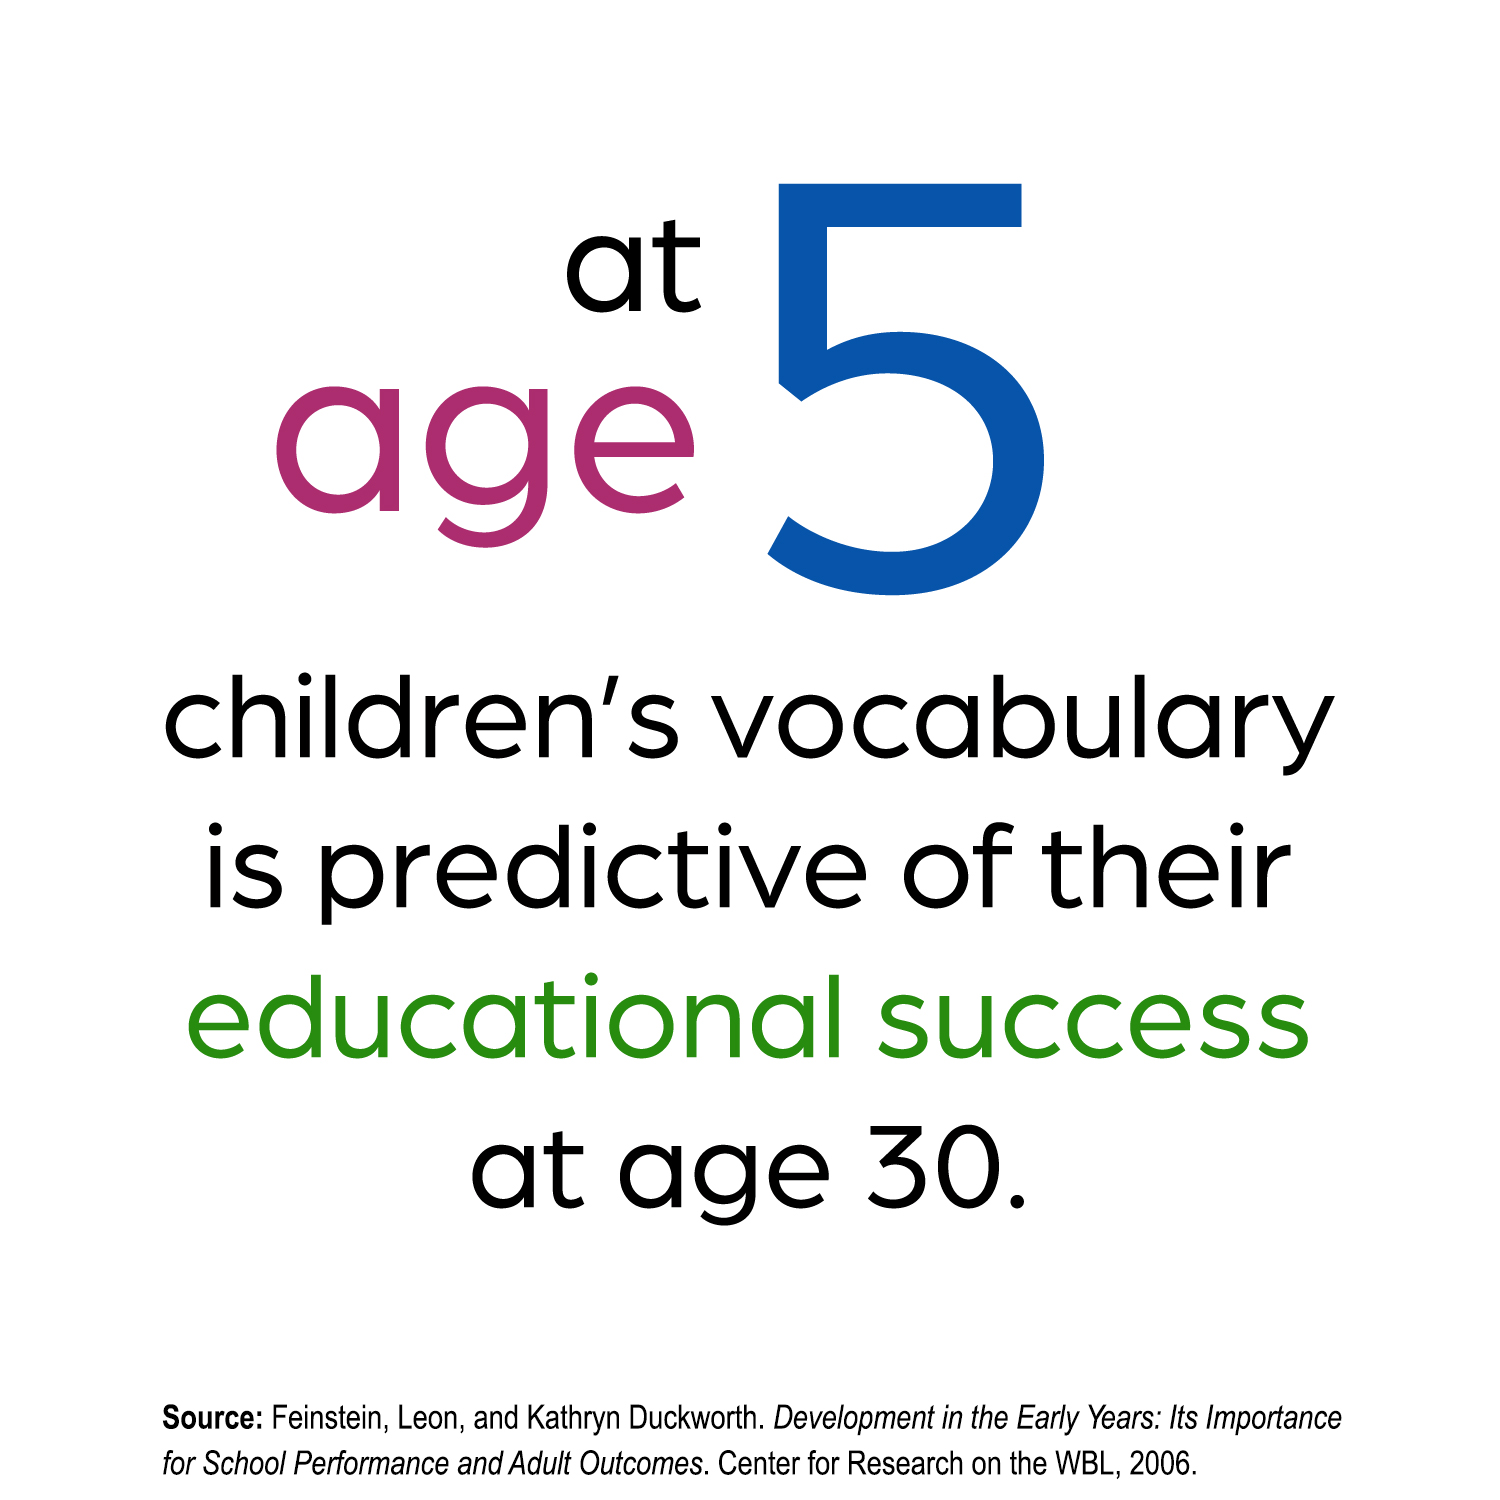 At age 5 children's vocabulary is predictive of their educational success at age 30. Source: Feinstein and Duckworth, Center for Research on the WBL, 2006.